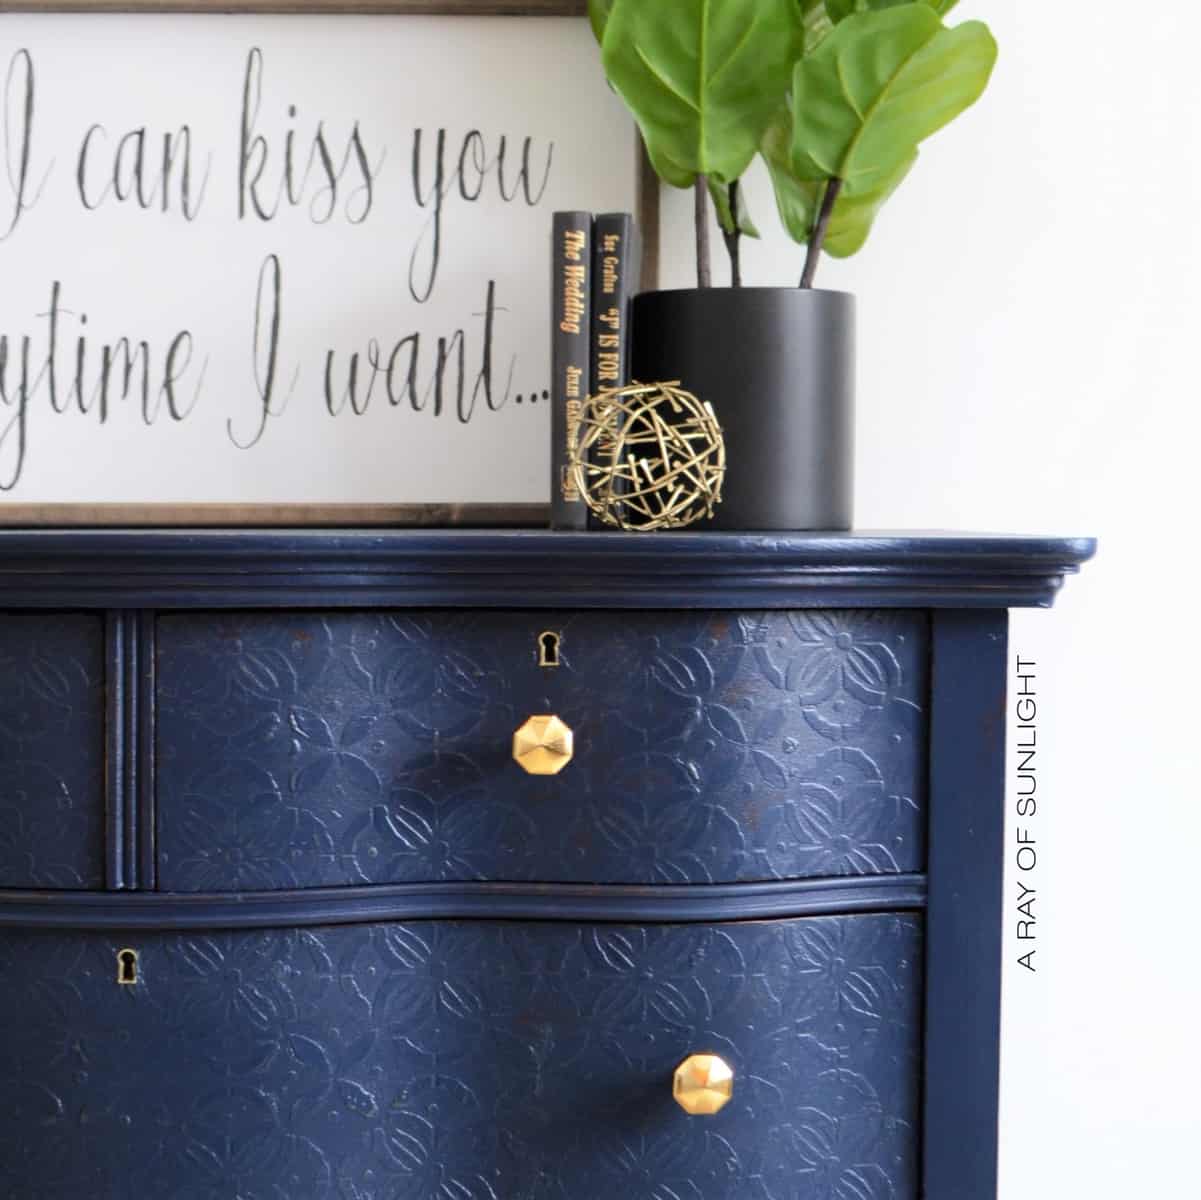 The Peacoat Dresser with Textured Drawers #DIY #furniturepaint #paintedfurniture #chalkpaint #textured #navy #dresser #serpentine #stencil #blue #countrychicpaint - blog.countrychicpaint.com